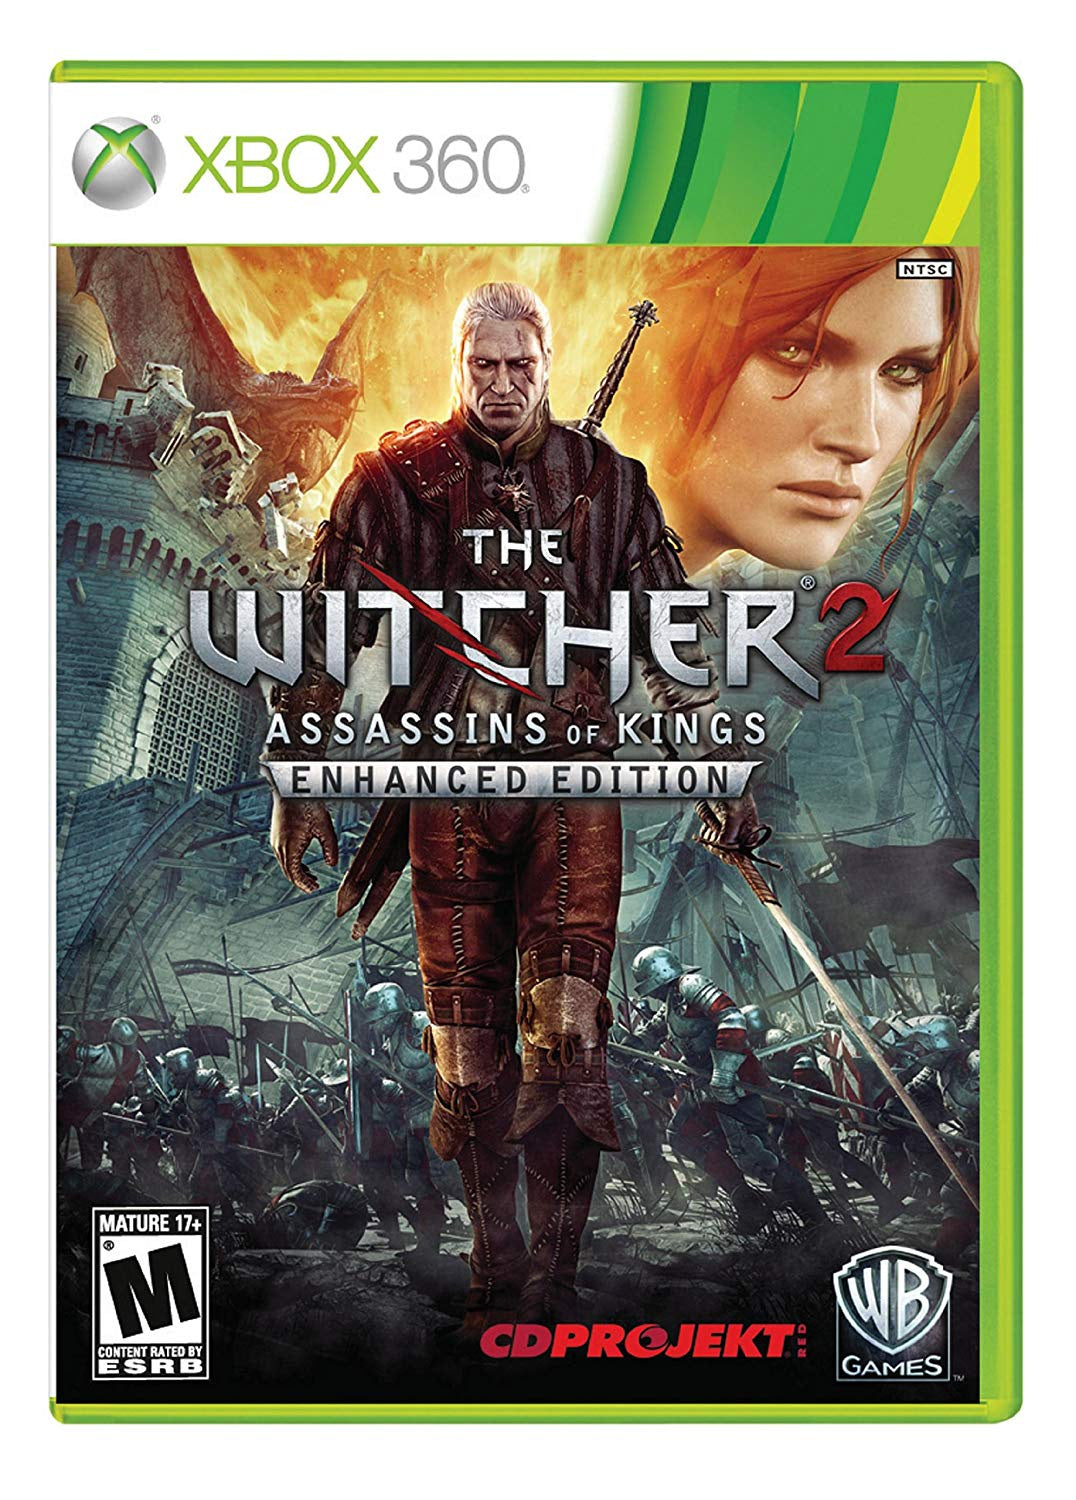 Witcher 2: Assassins of Kings Enhanced Edition - Xbox 360 (Pre-owned)